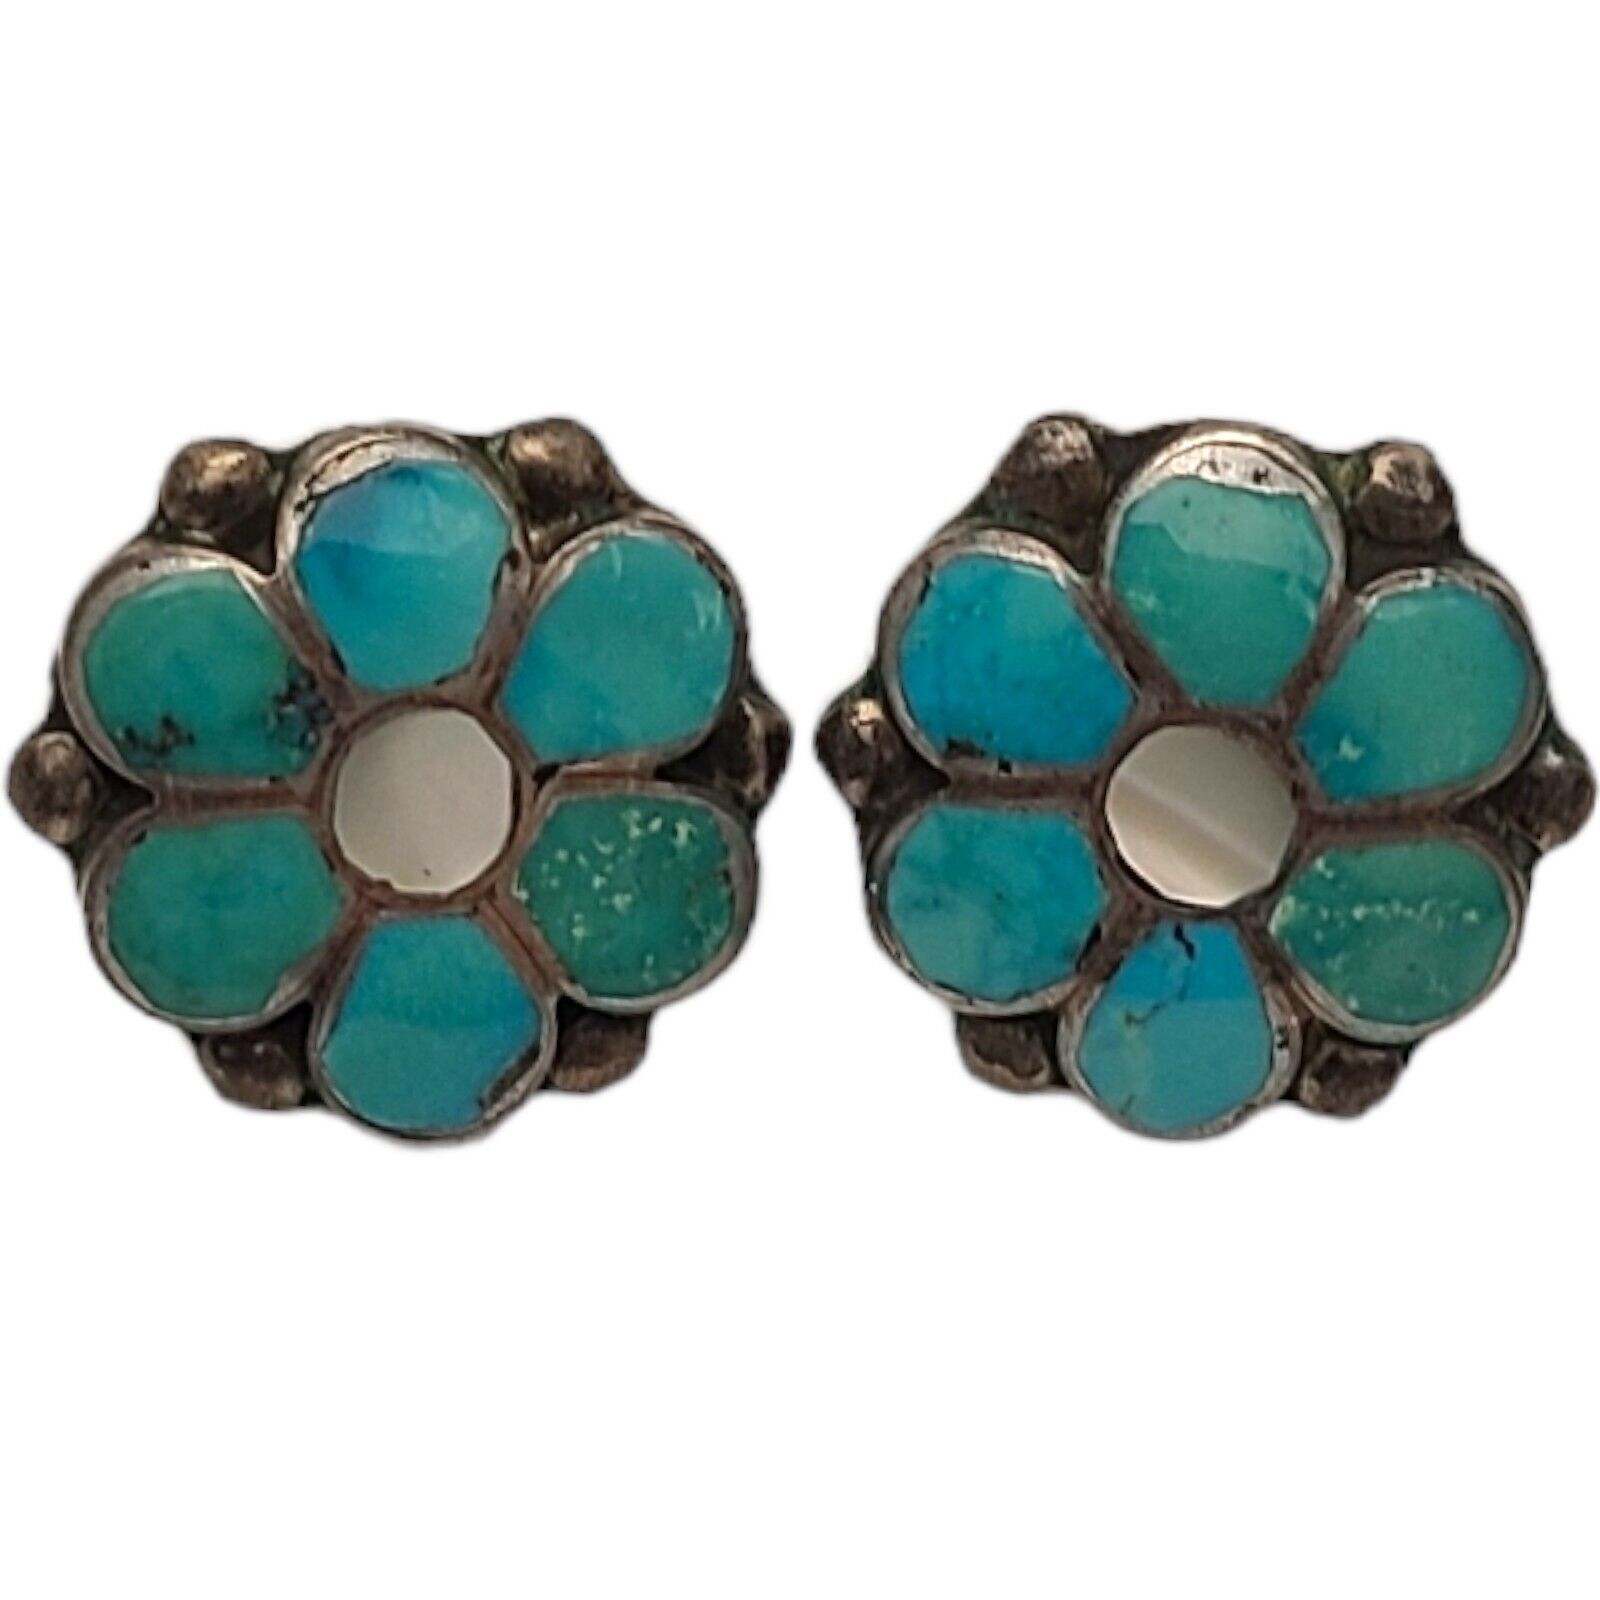 VINTAGE ZUNI INDIAN DISHTA STYLE SILVER INLAID TURQUOISE SCREW BACK EARRINGS